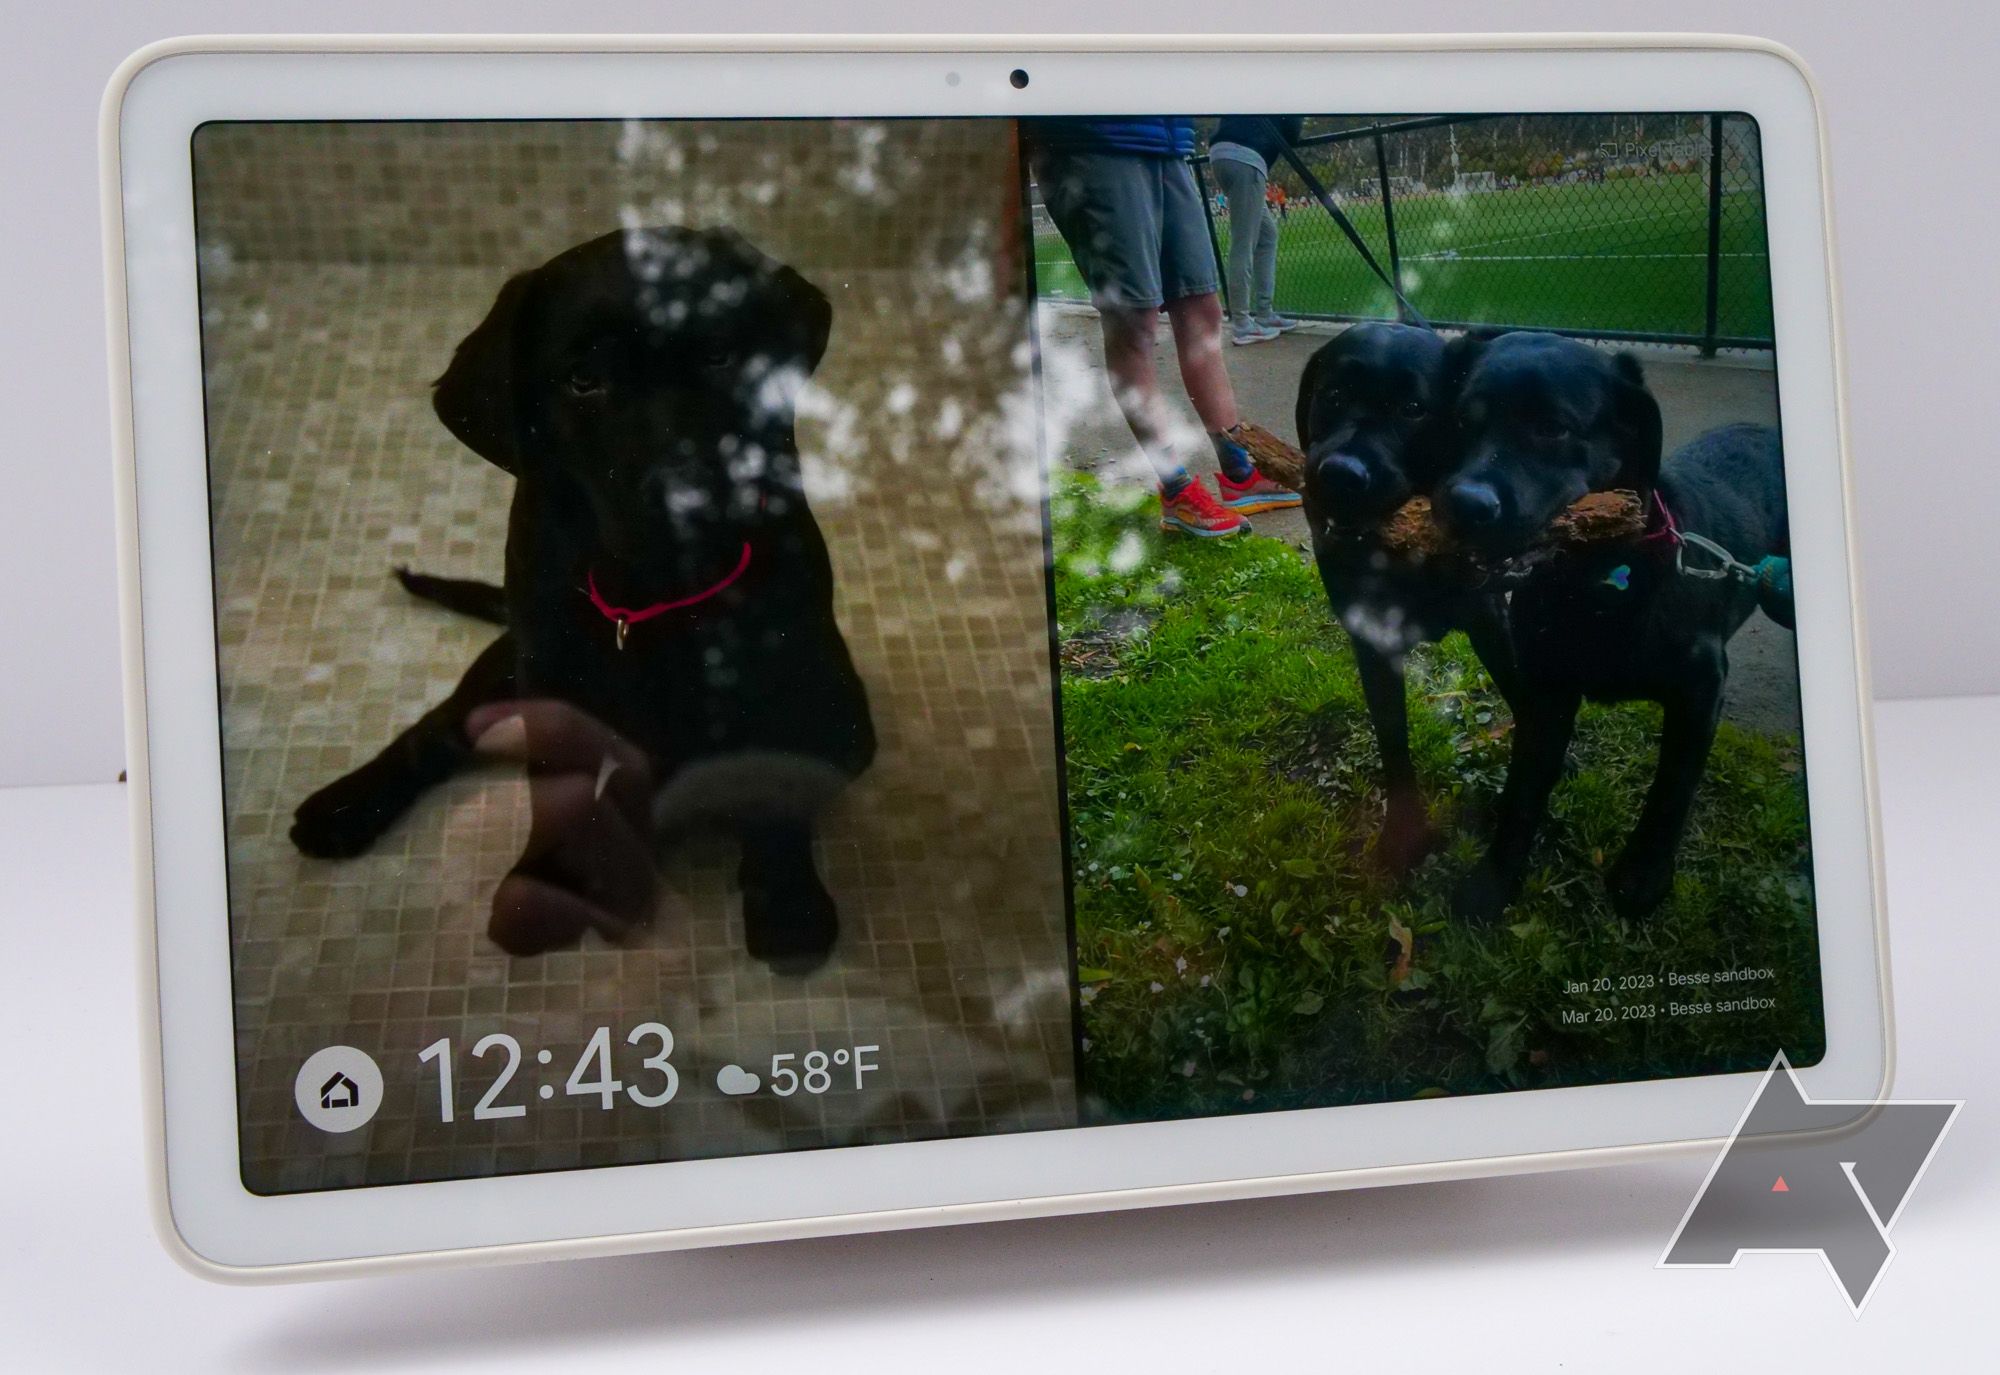 The Google Pixel Tablet showing pictures of a dog